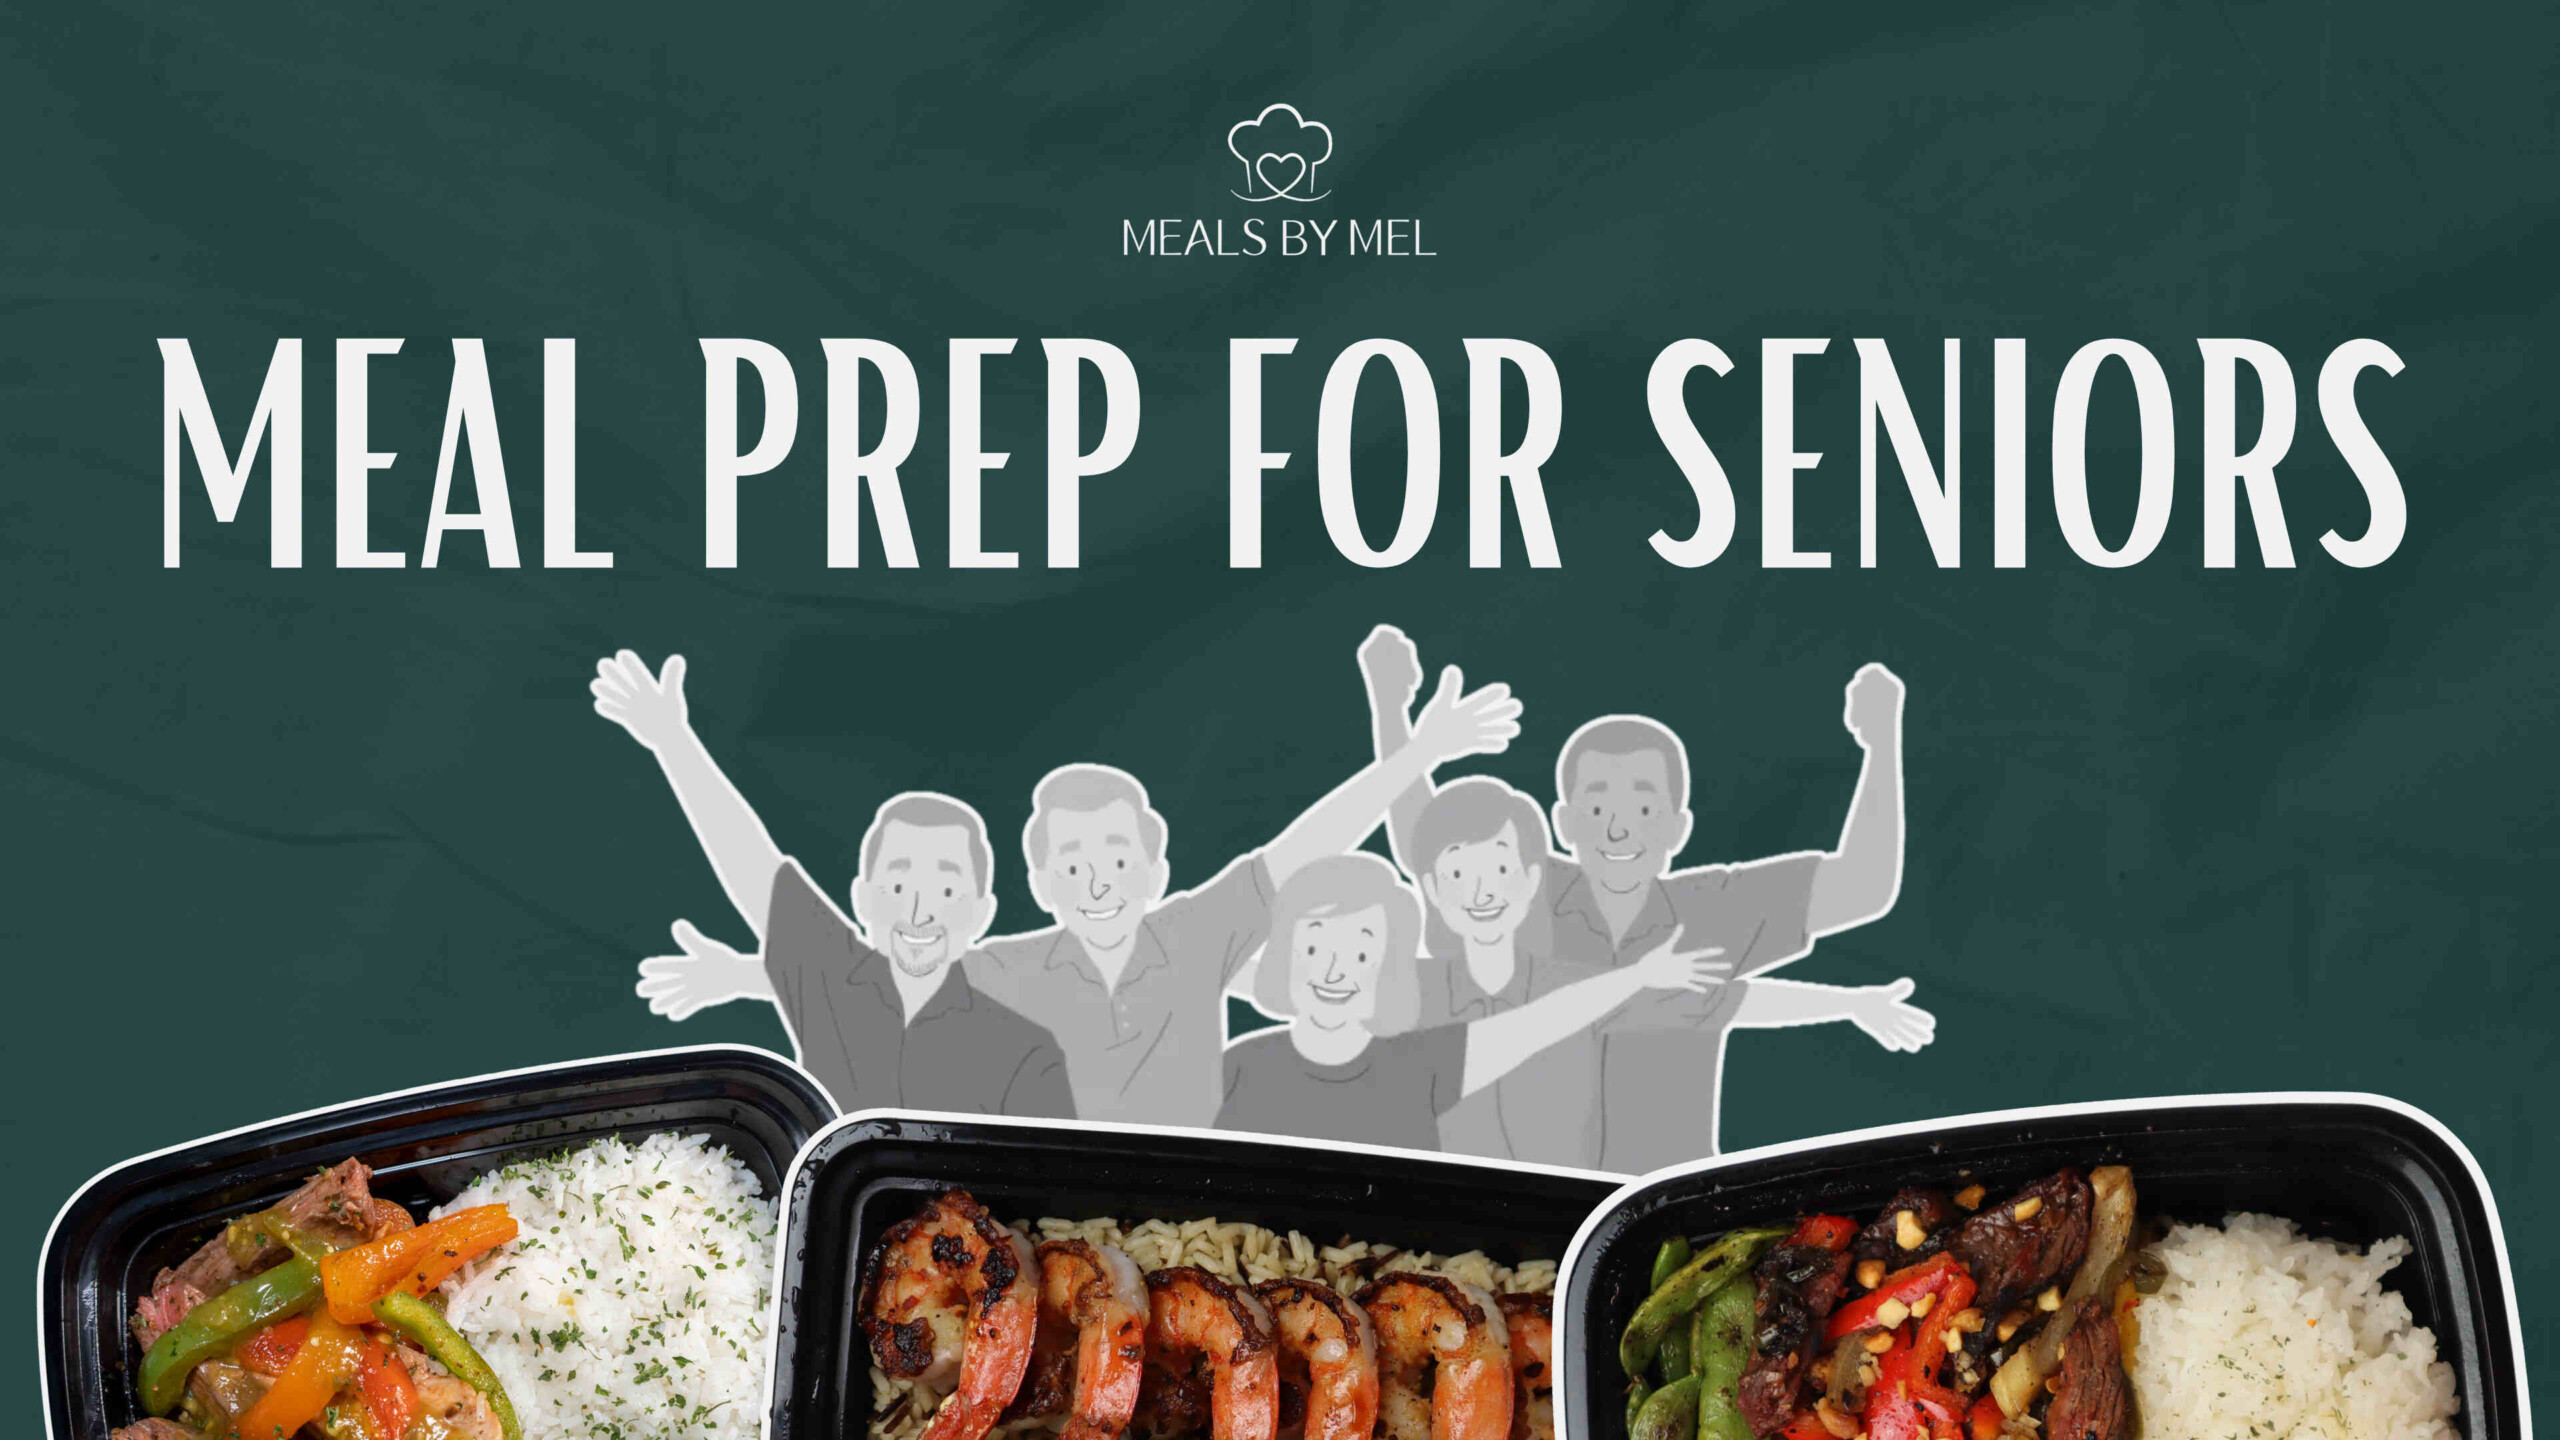 10 Reasons Why Meal Prep for Seniors with MealsByMel Makes Life Healthier and Better